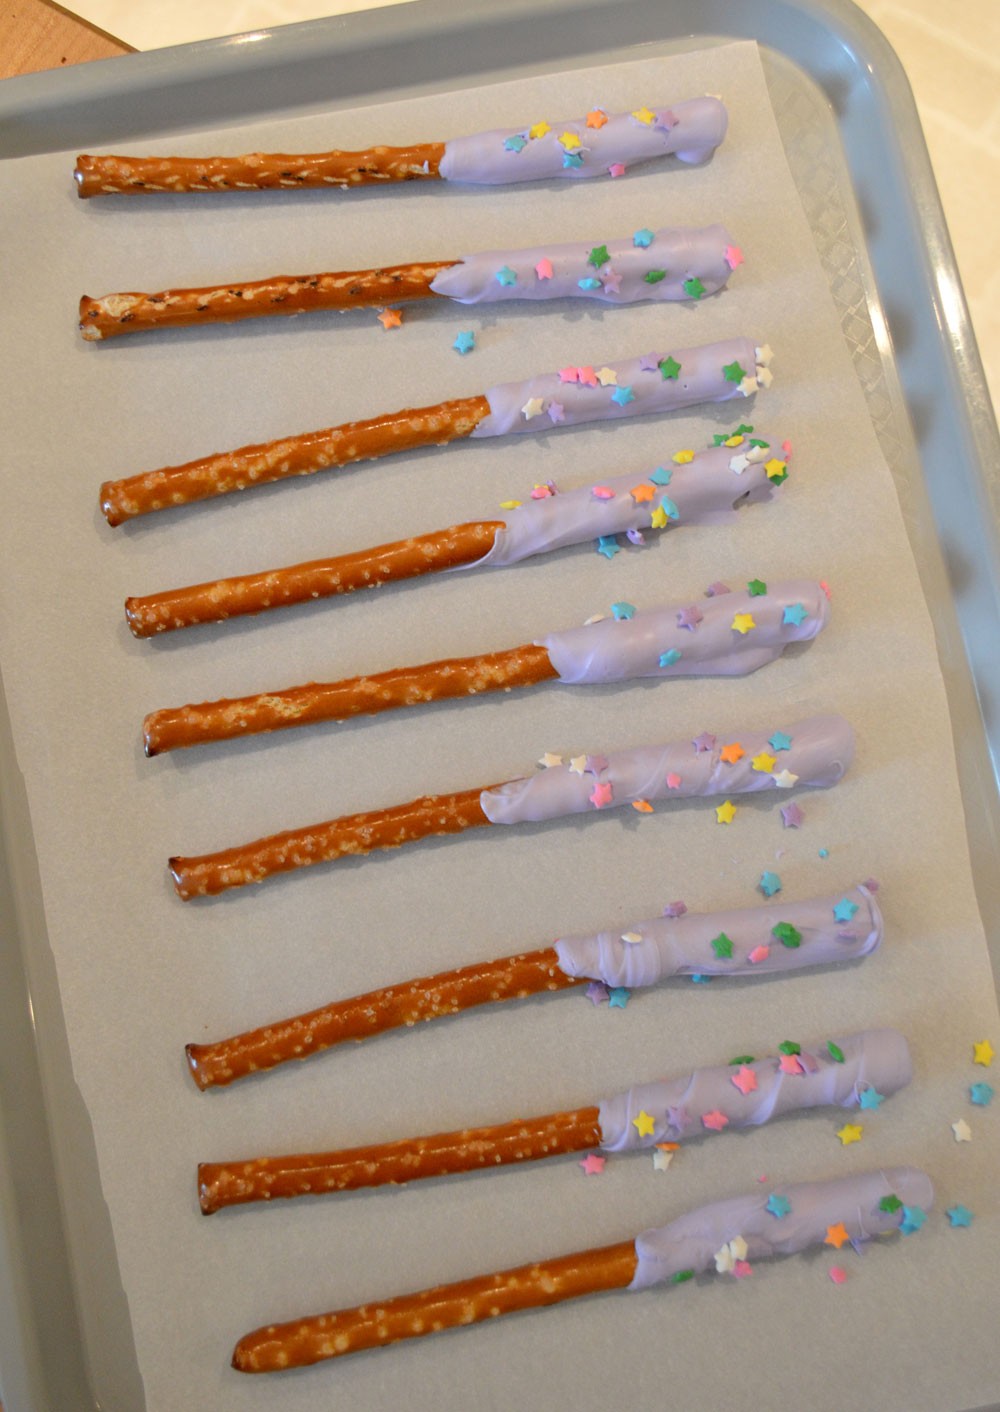 Yummy Chocolate dipped pretzels party treats